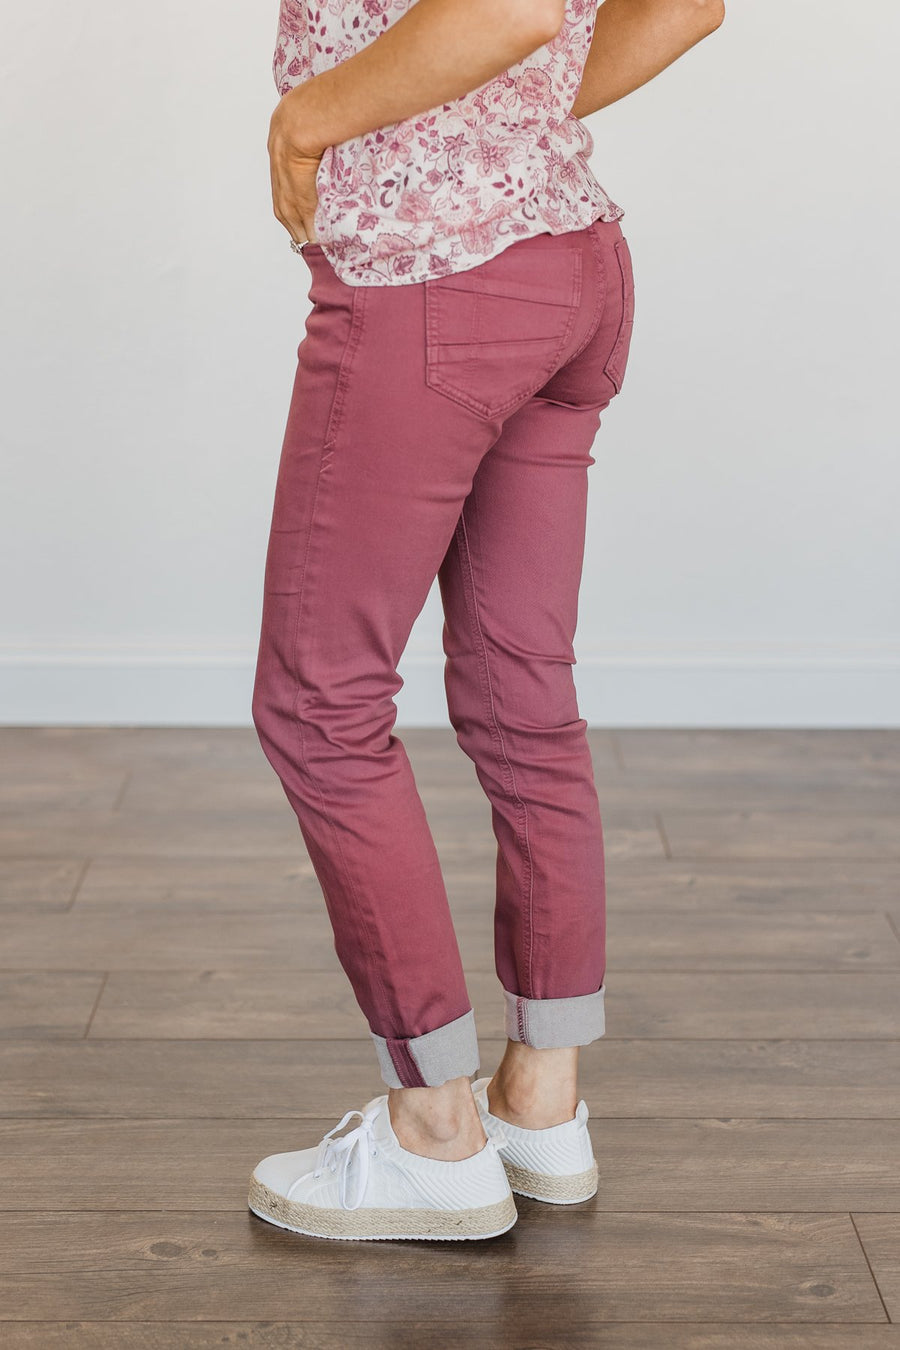 Rubberband Stretch Skinny Jeans- Rosemary Wash – The Pulse Boutique